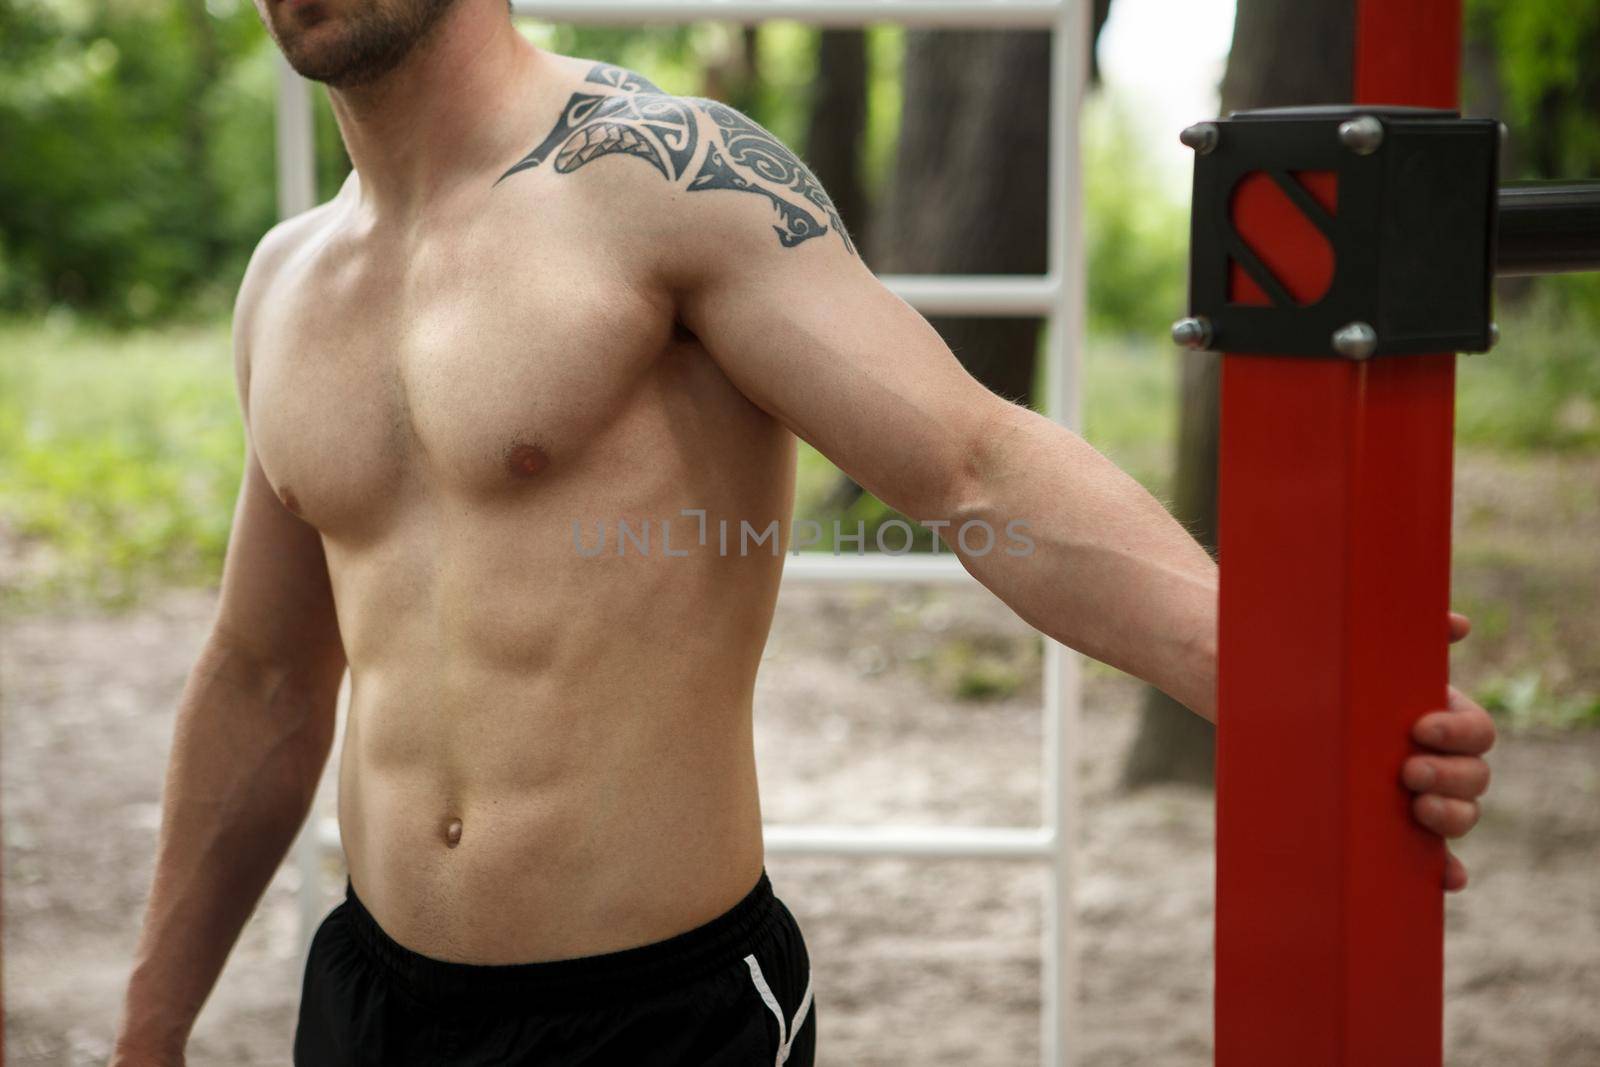 Cropped shot of a muscular shirtless athletic man resting during outdoor workout